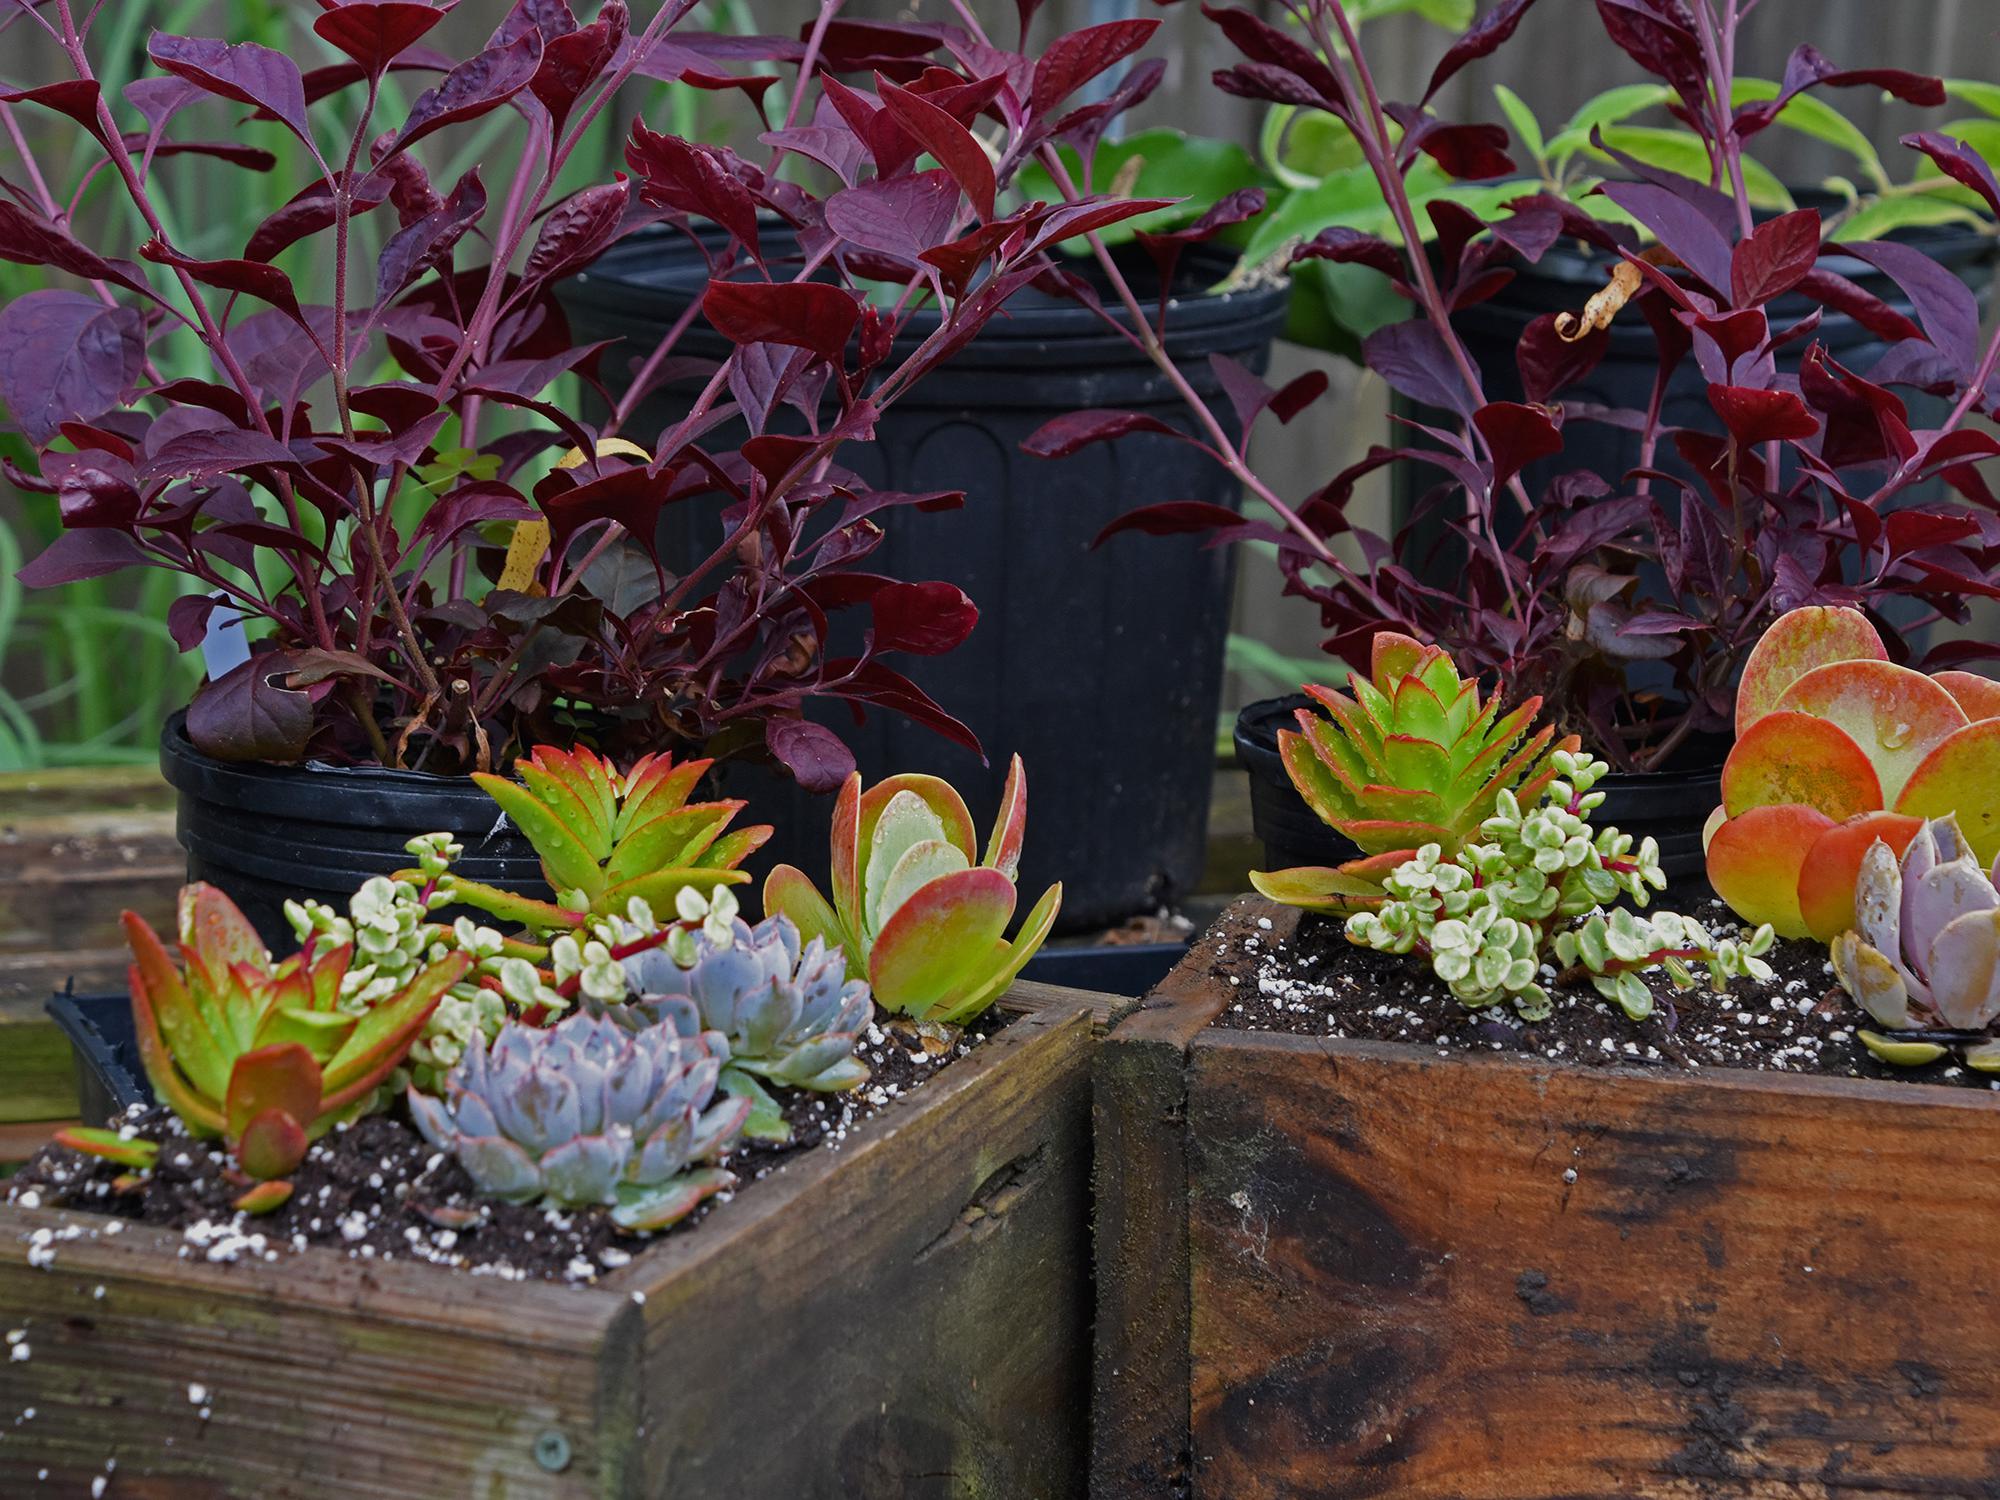 The use of succulents is a popular trend in the green industry. These plants with soft, juicy leaves and stems are good choices for low-water-use gardening. (Photo by MSU Extension Service/Gary Bachman)